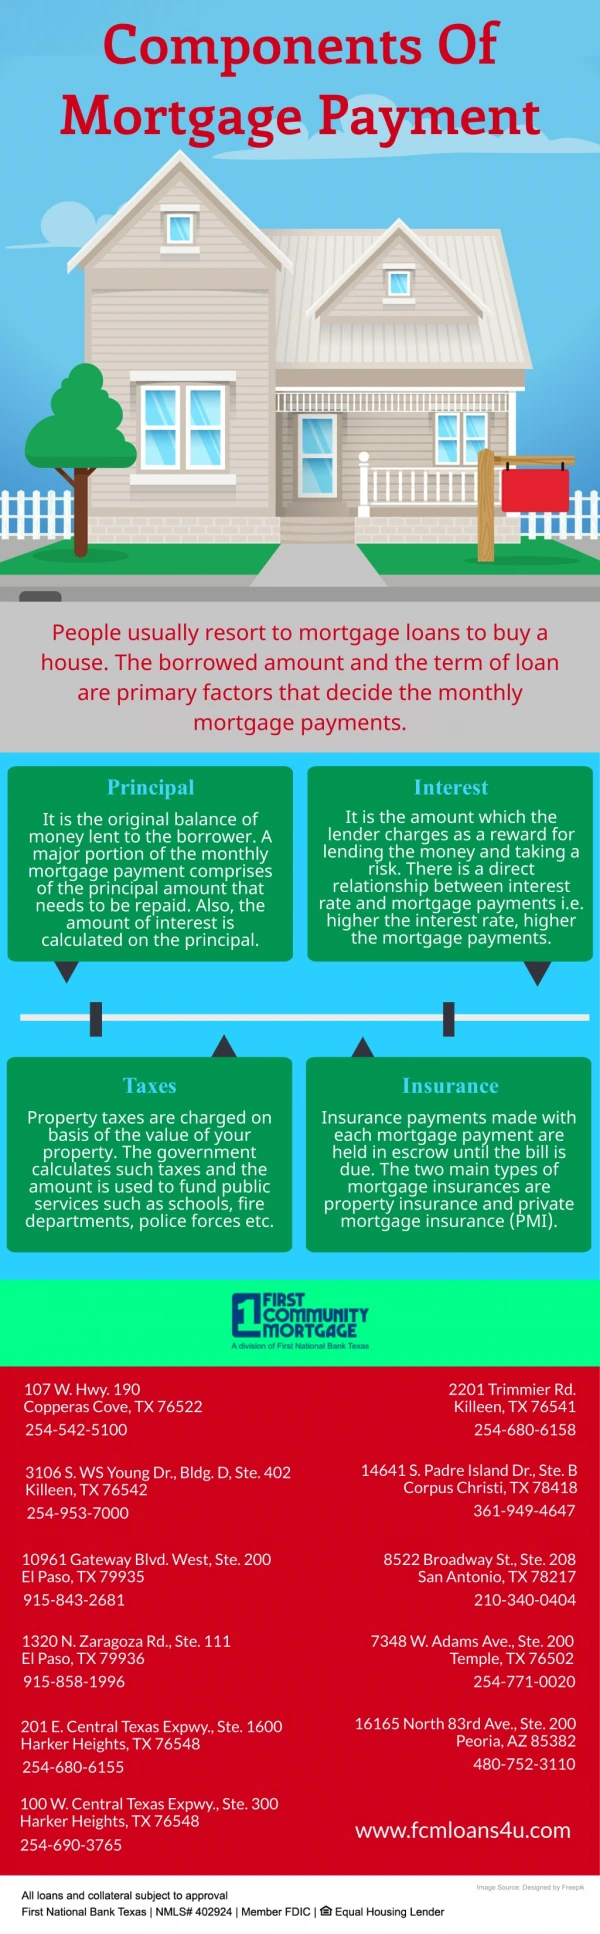 Components Of Mortgage Payment